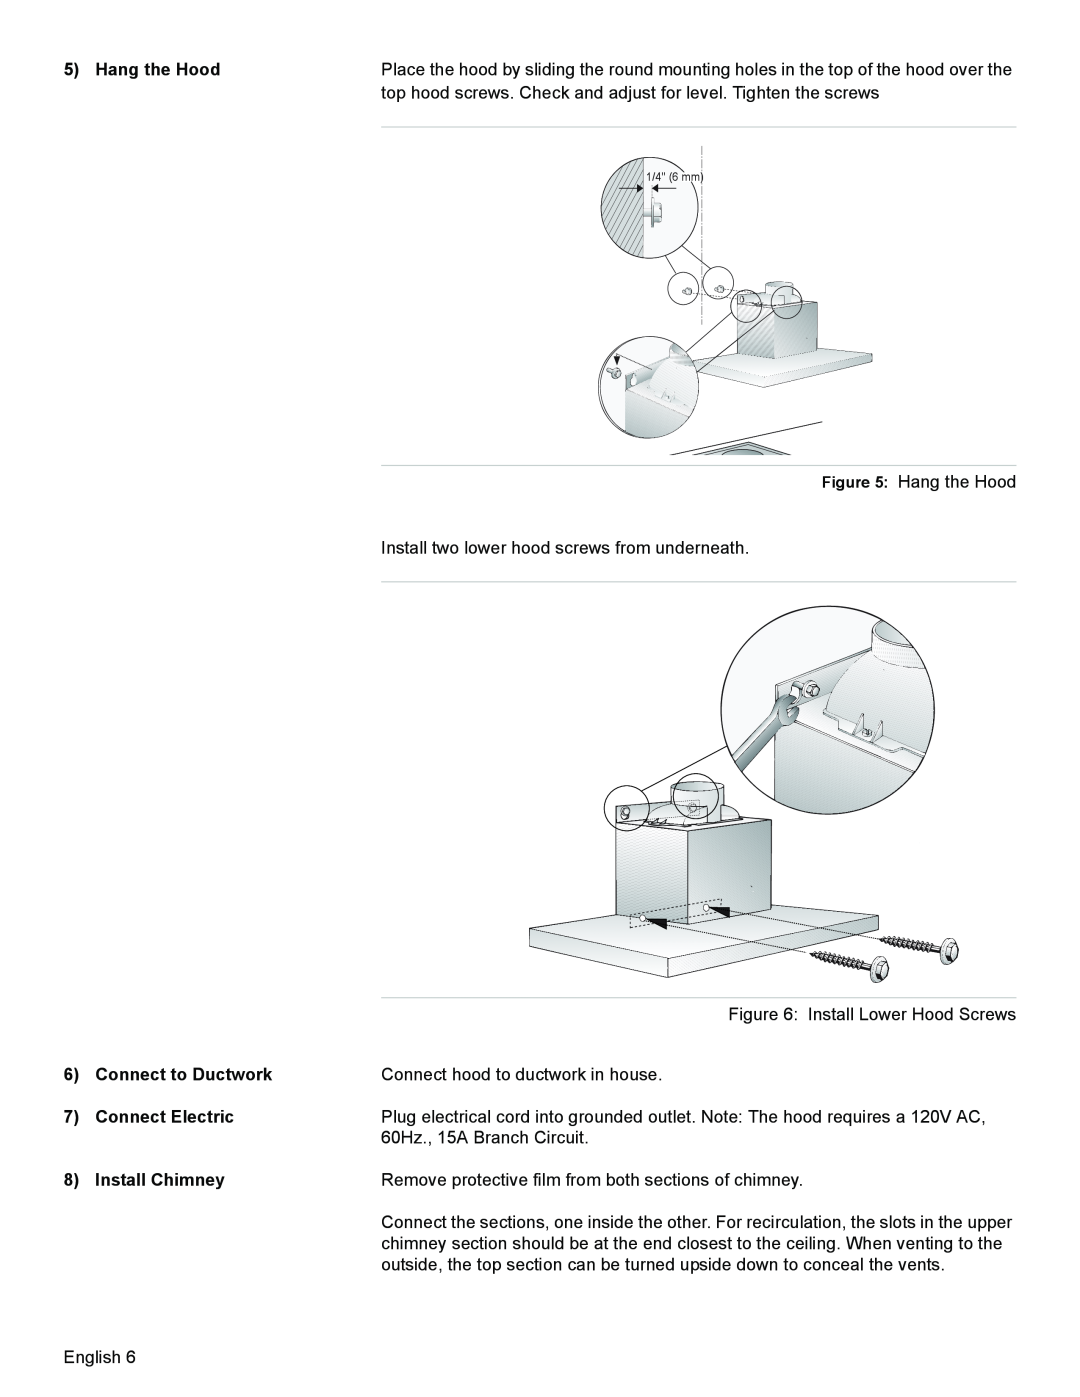 Bosch Appliances DKE94 installation manual Hang the Hood, Connect to Ductwork, Connect Electric, Install Chimney, 1/4 6 mm 